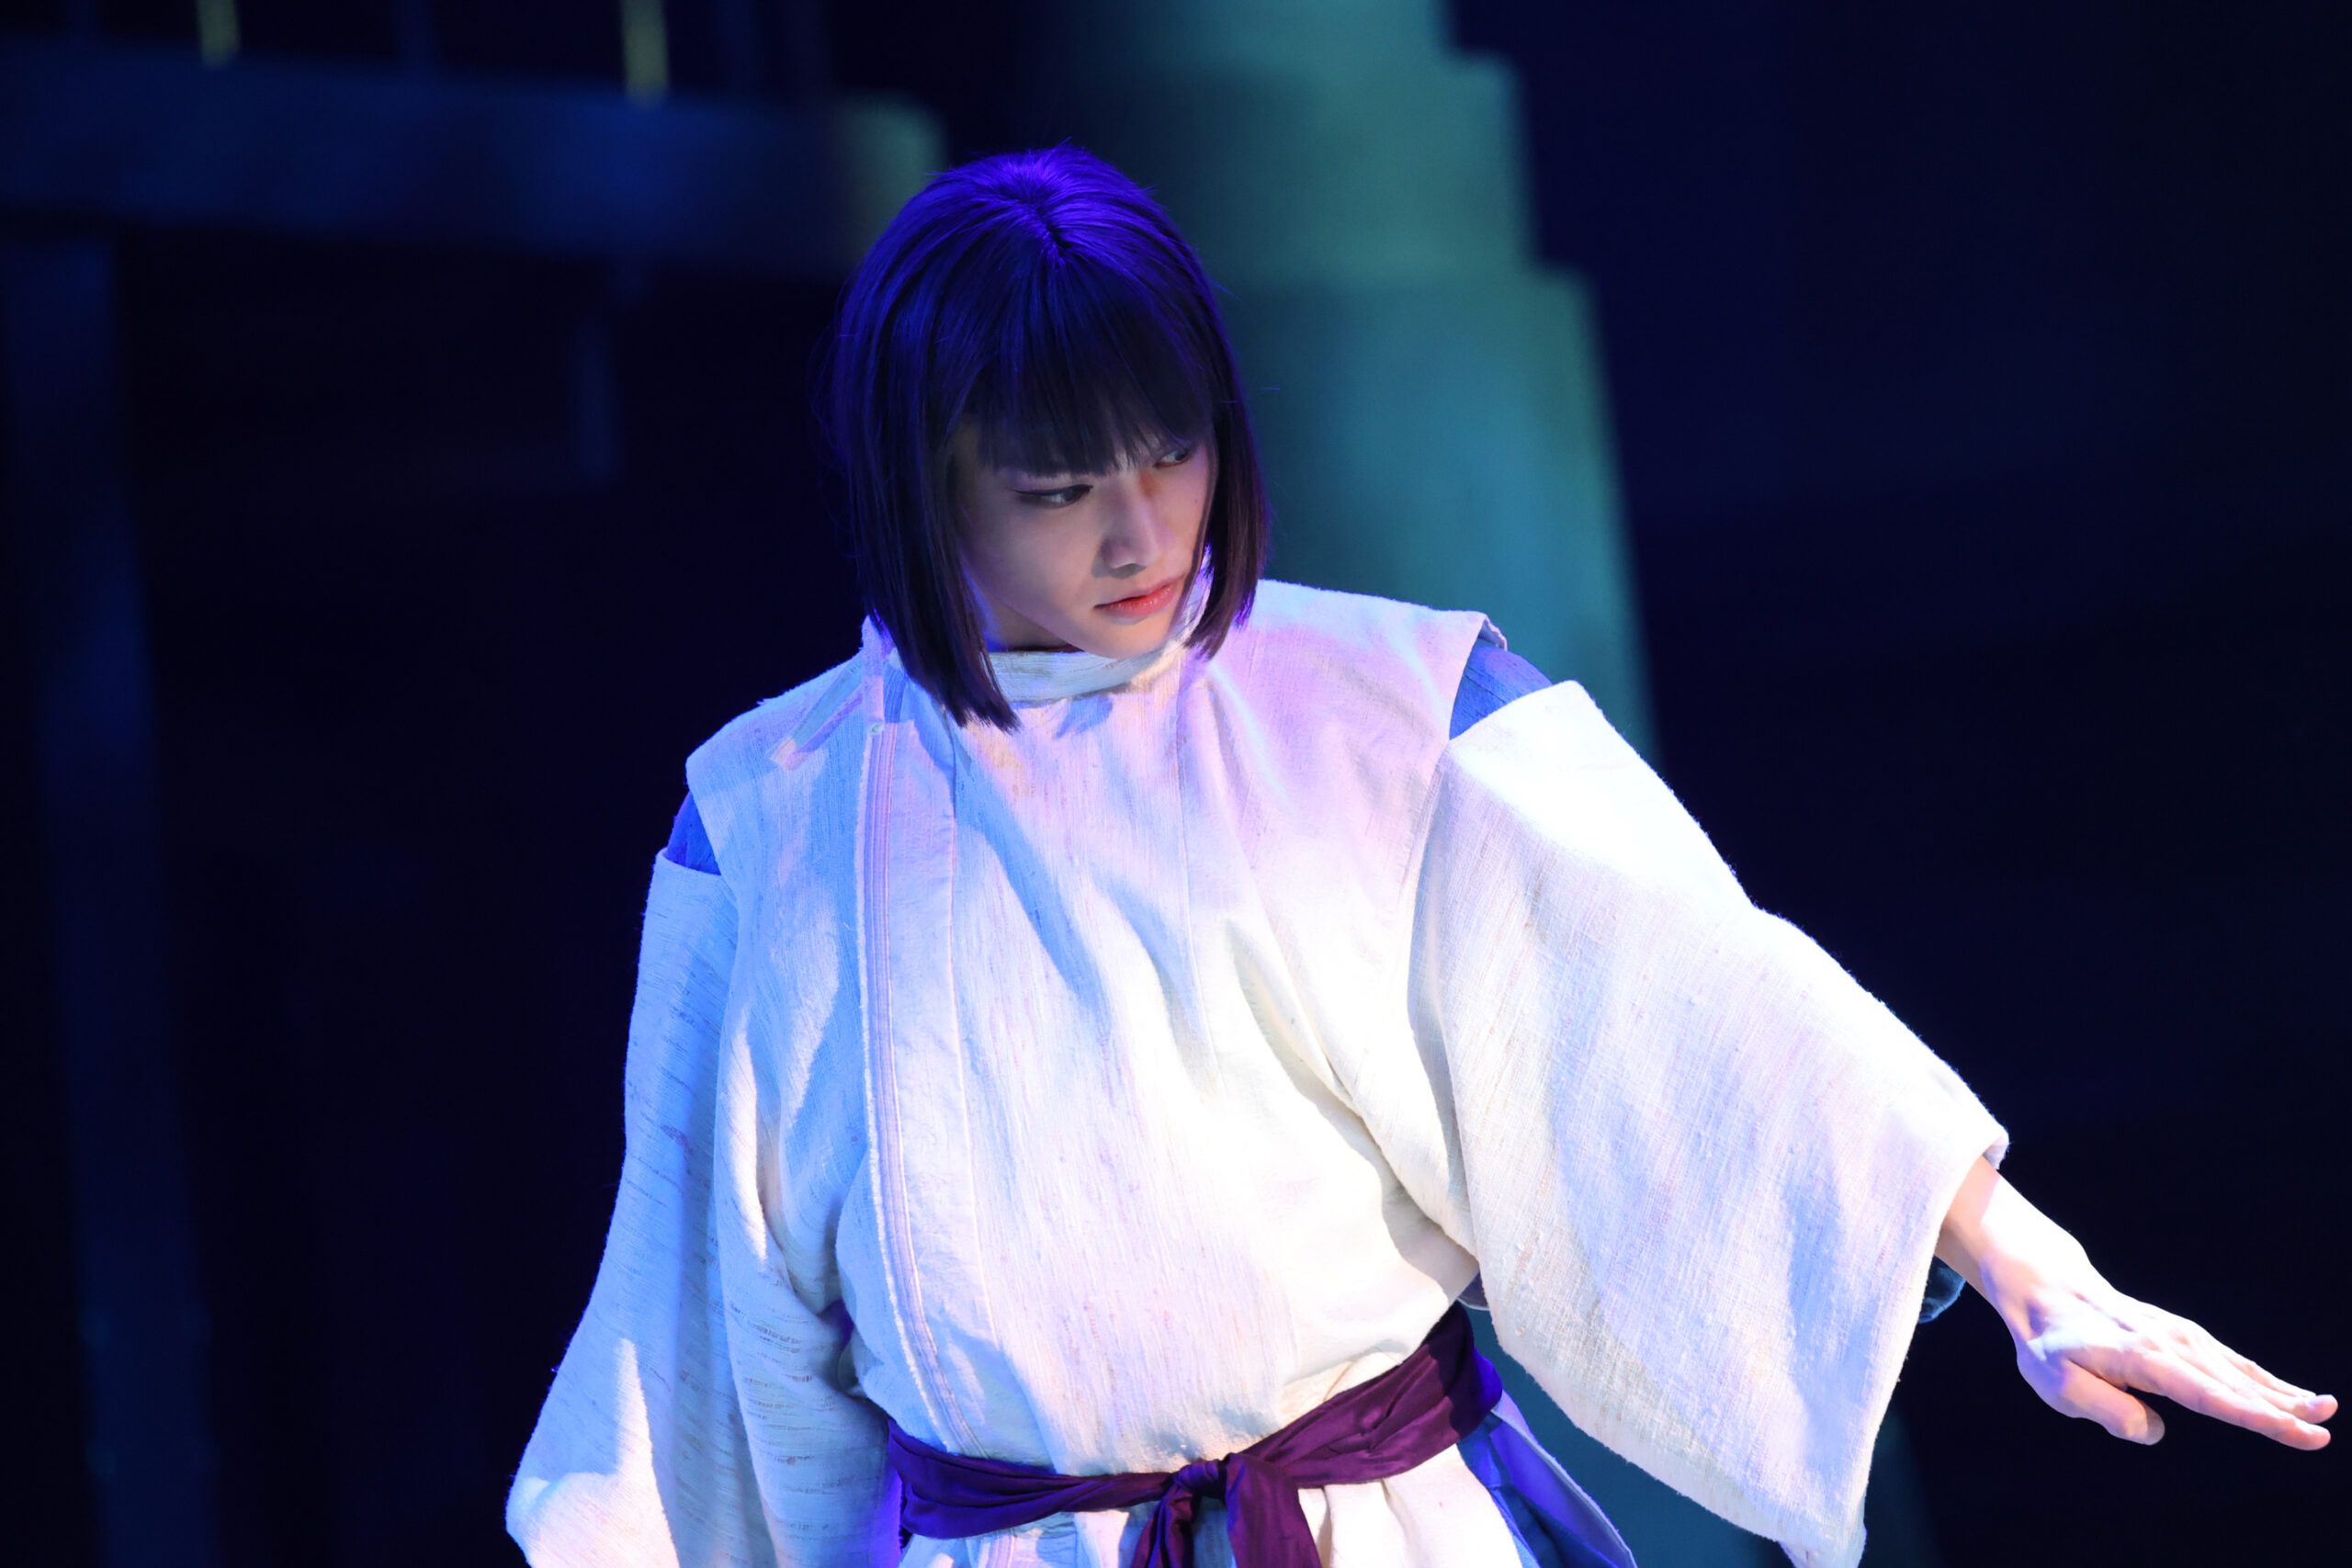 spirited-away-on-stage-image